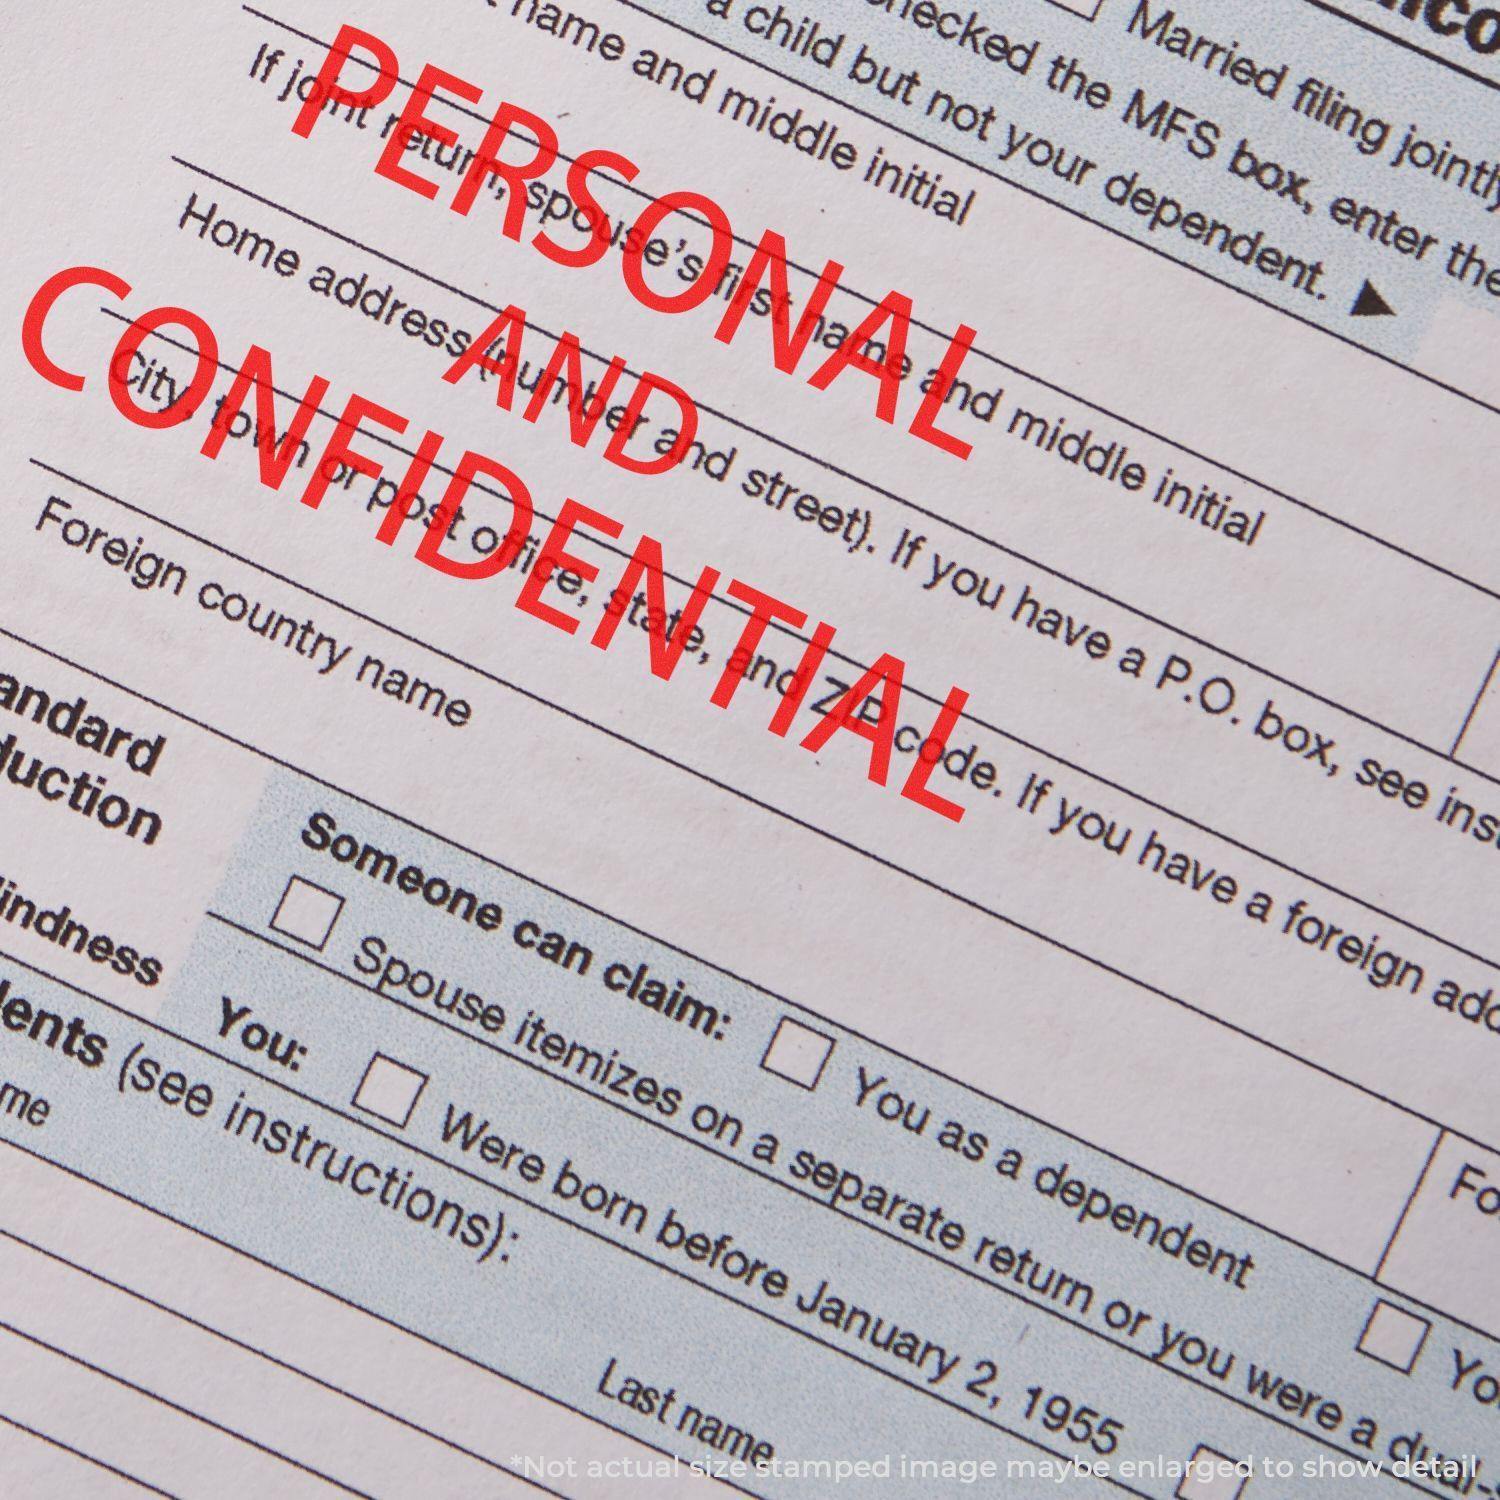 A stock office rubber stamp with a stamped image showing how the text "PERSONAL AND CONFIDENTIAL" is displayed after stamping.